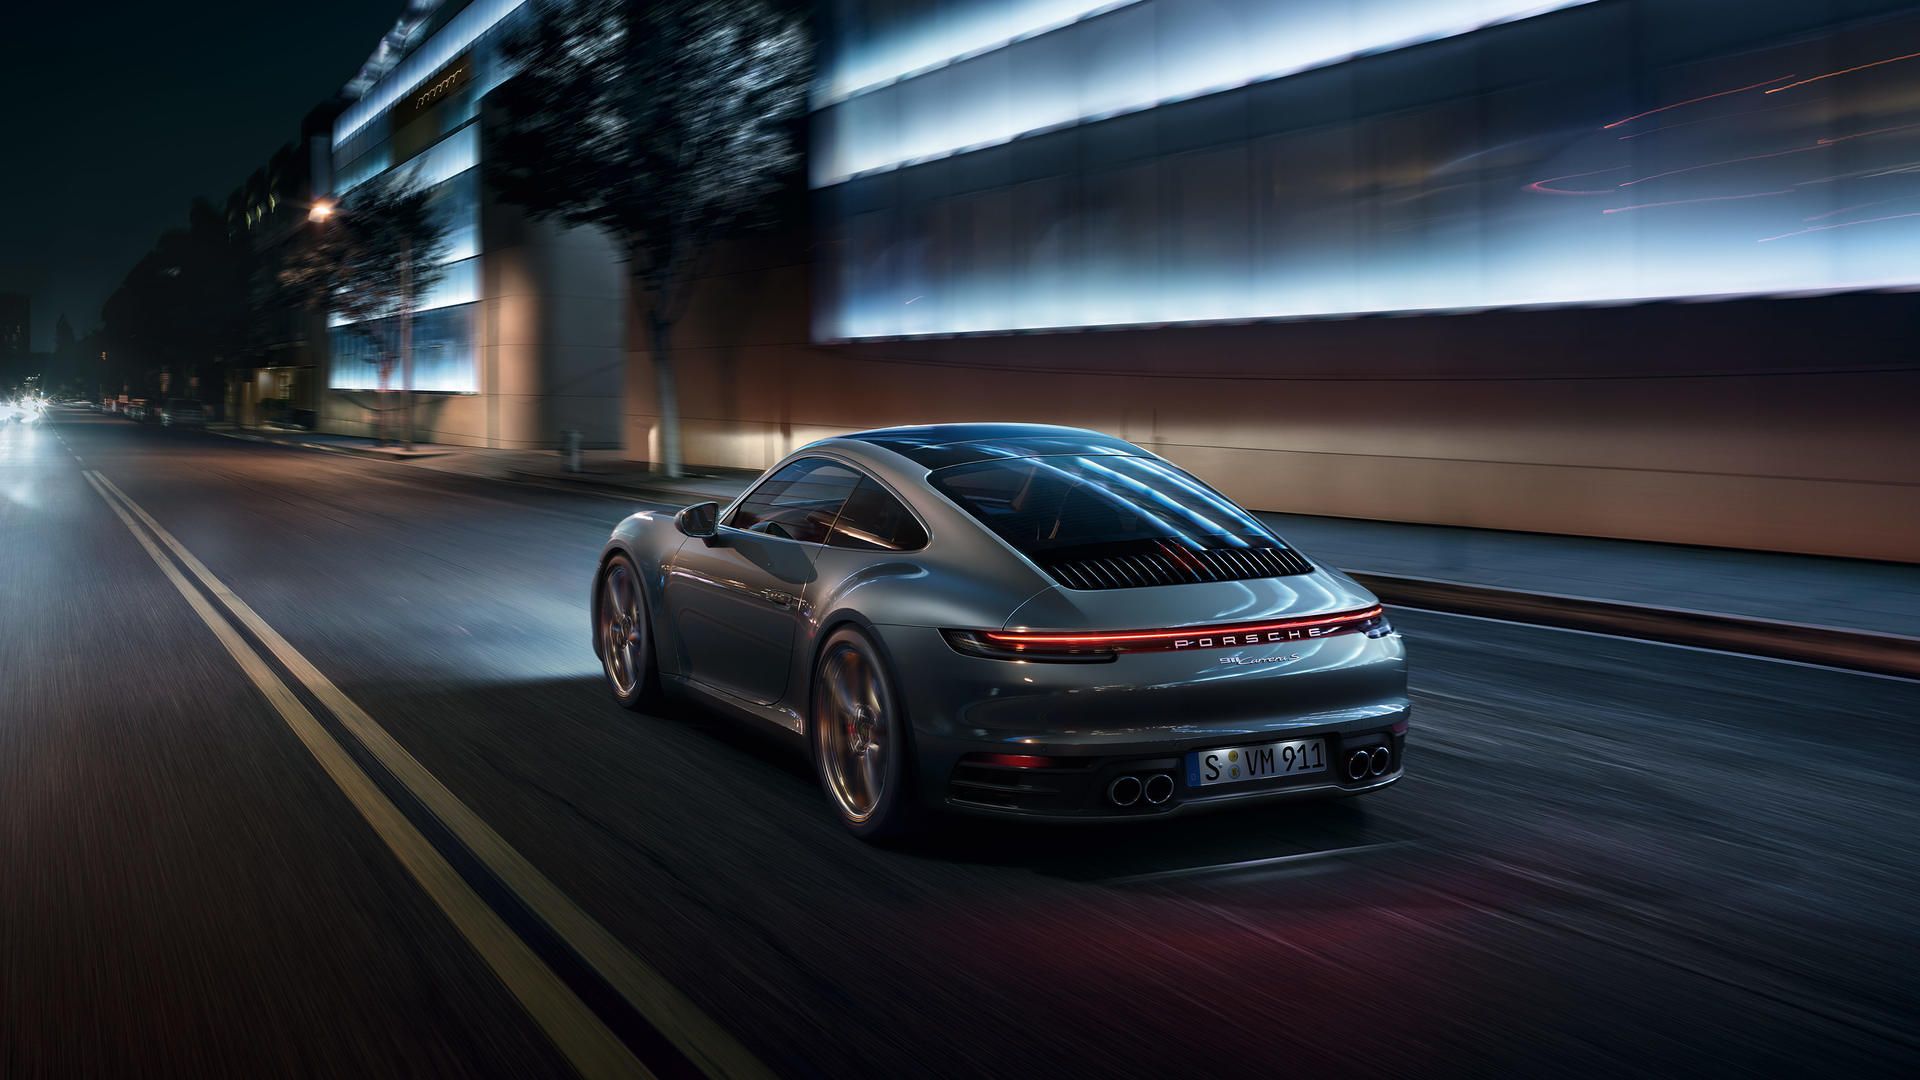 The 2020 Porsche 911 is Faster and More Powerful Than Ever Before